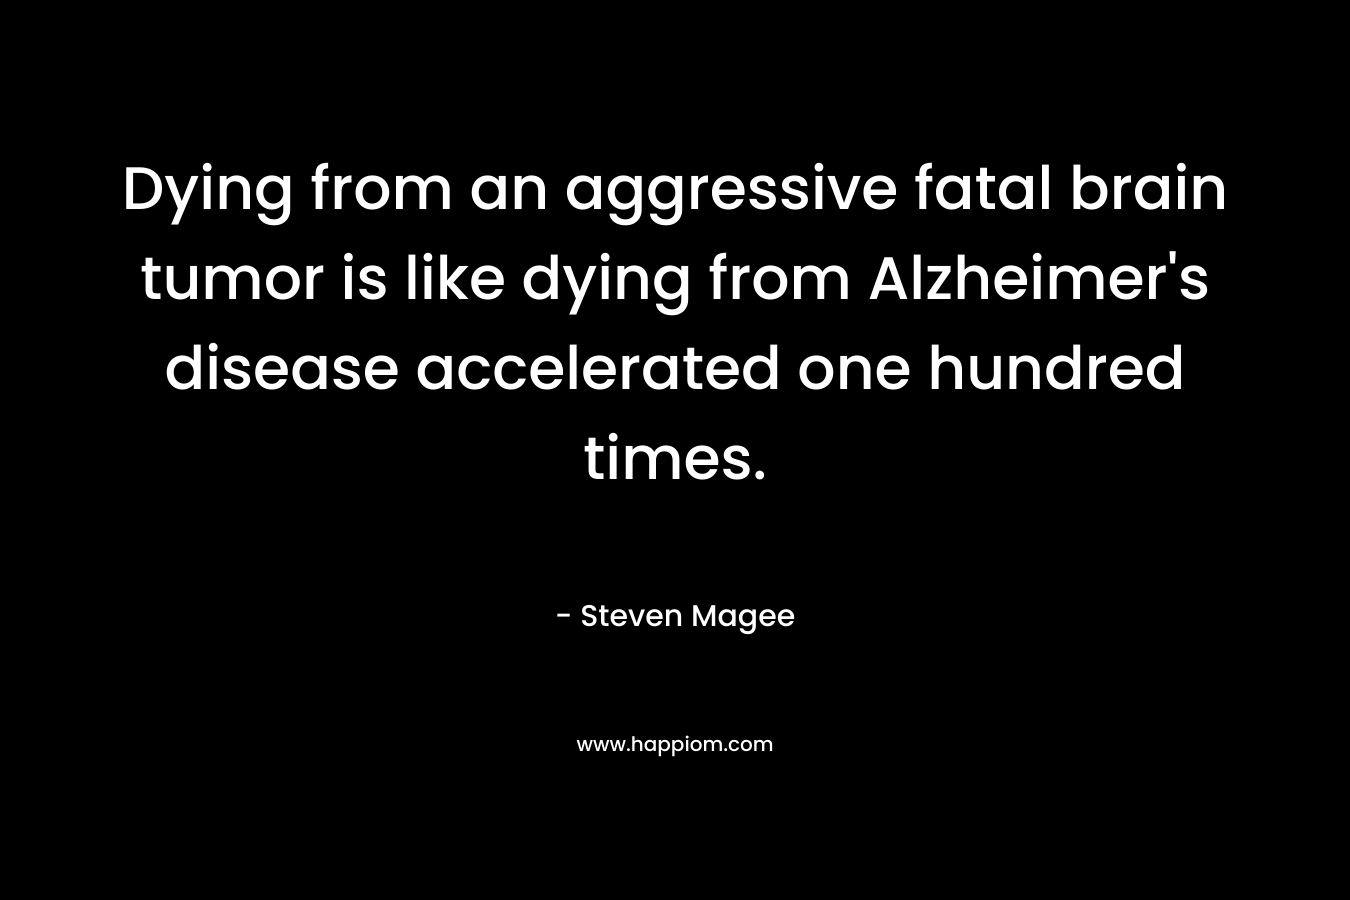 Dying from an aggressive fatal brain tumor is like dying from Alzheimer’s disease accelerated one hundred times. – Steven Magee